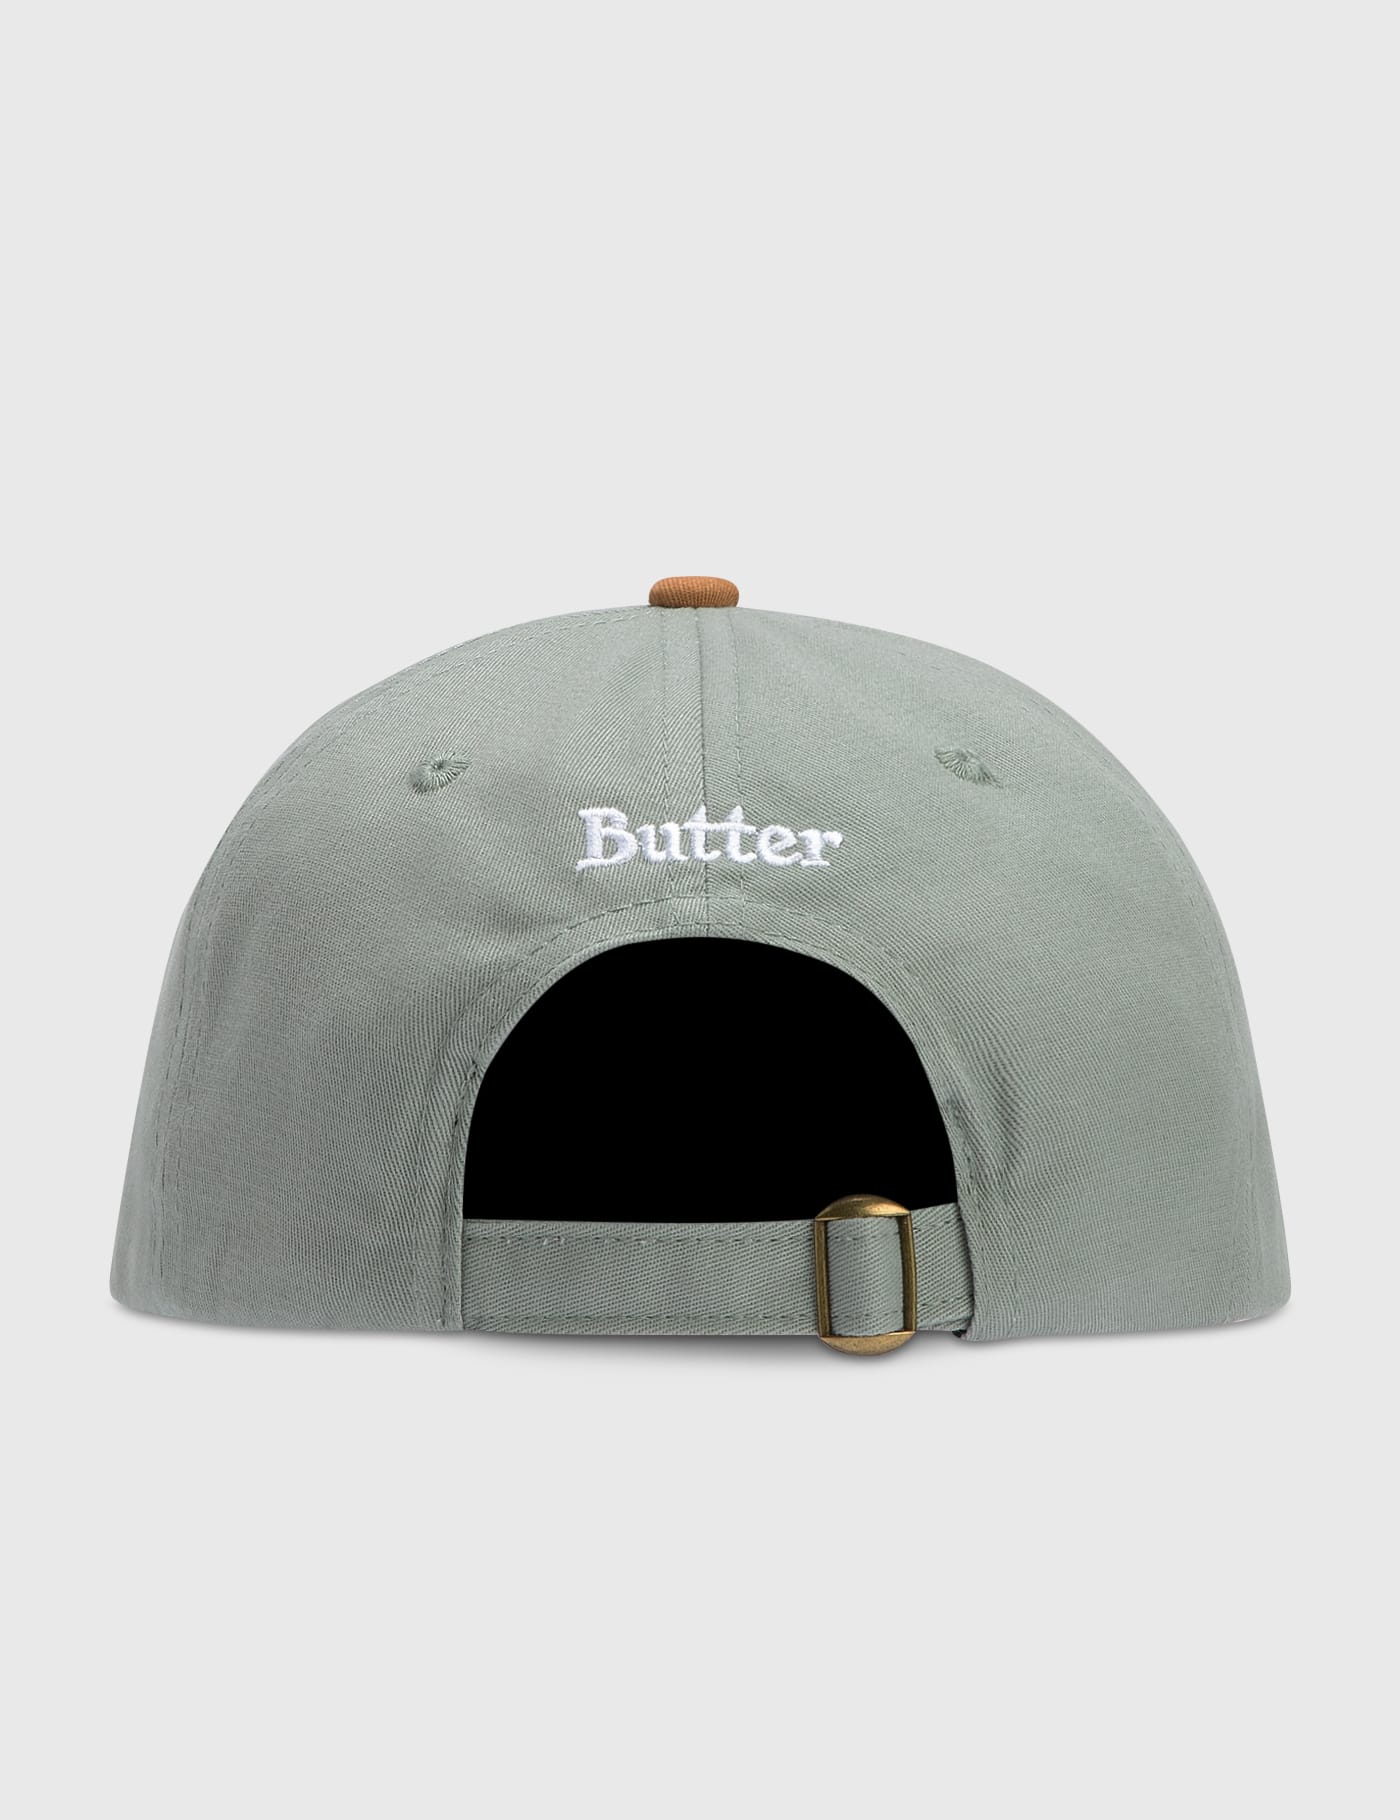 Butter Goods - Timbo 6 Panel Cap | HBX - Globally Curated Fashion 